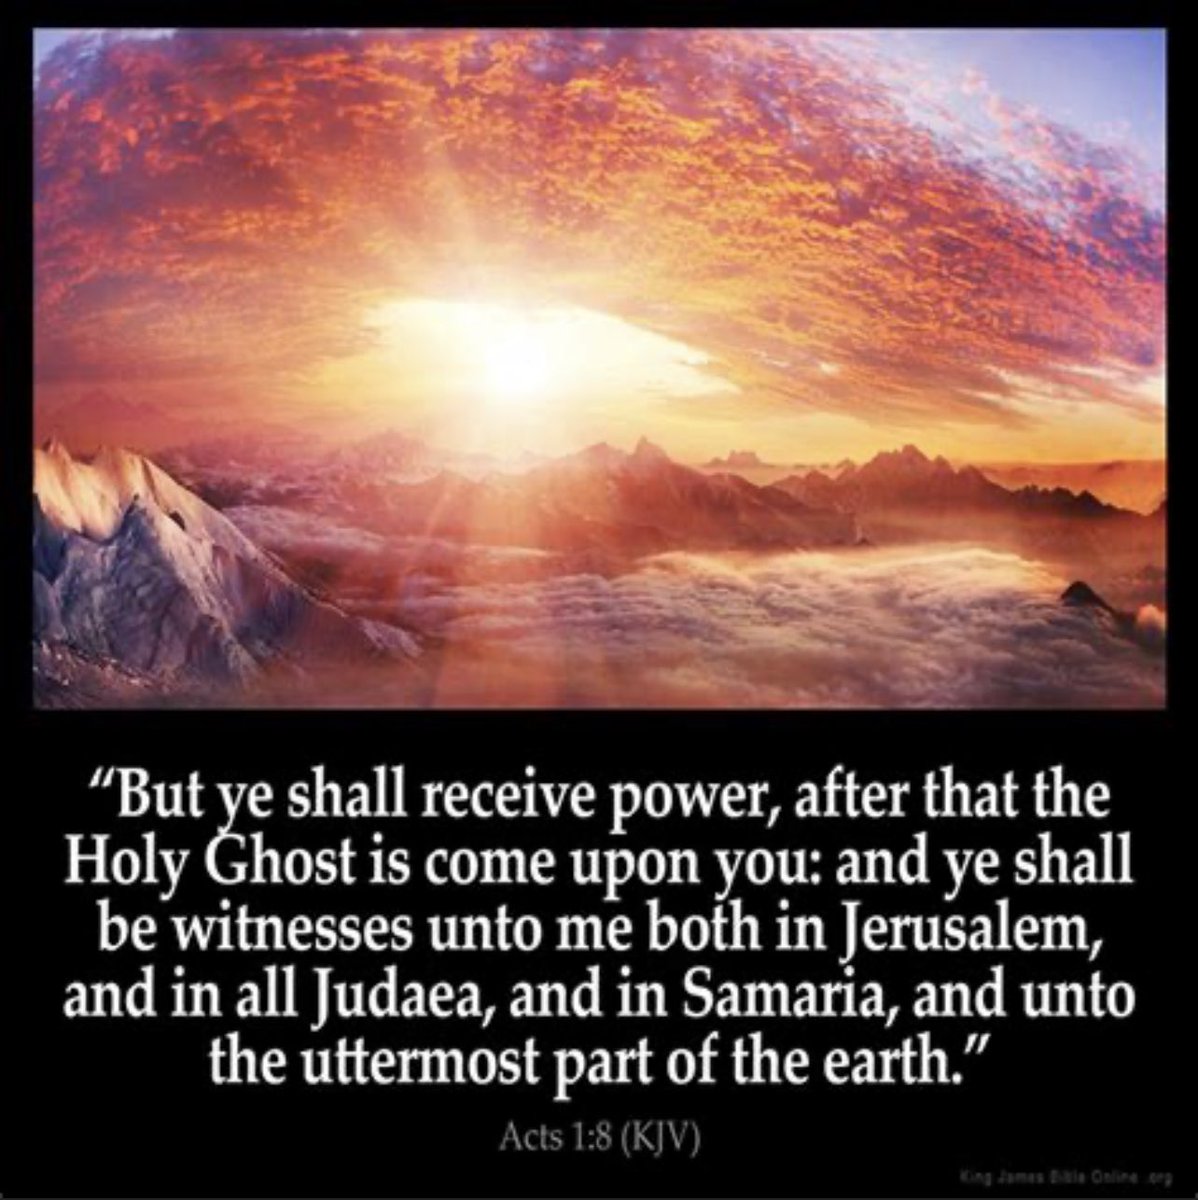 #ThingsJesusSaid
#JesusIsLord 
Acts 1:8
King James Version 🕊
“But ye shall receive power, after that the Holy Ghost is come upon you: and ye shall be witnesses unto me both in Jerusalem, and in all Judaea, and in Samaria, and unto the uttermost part of the earth.”